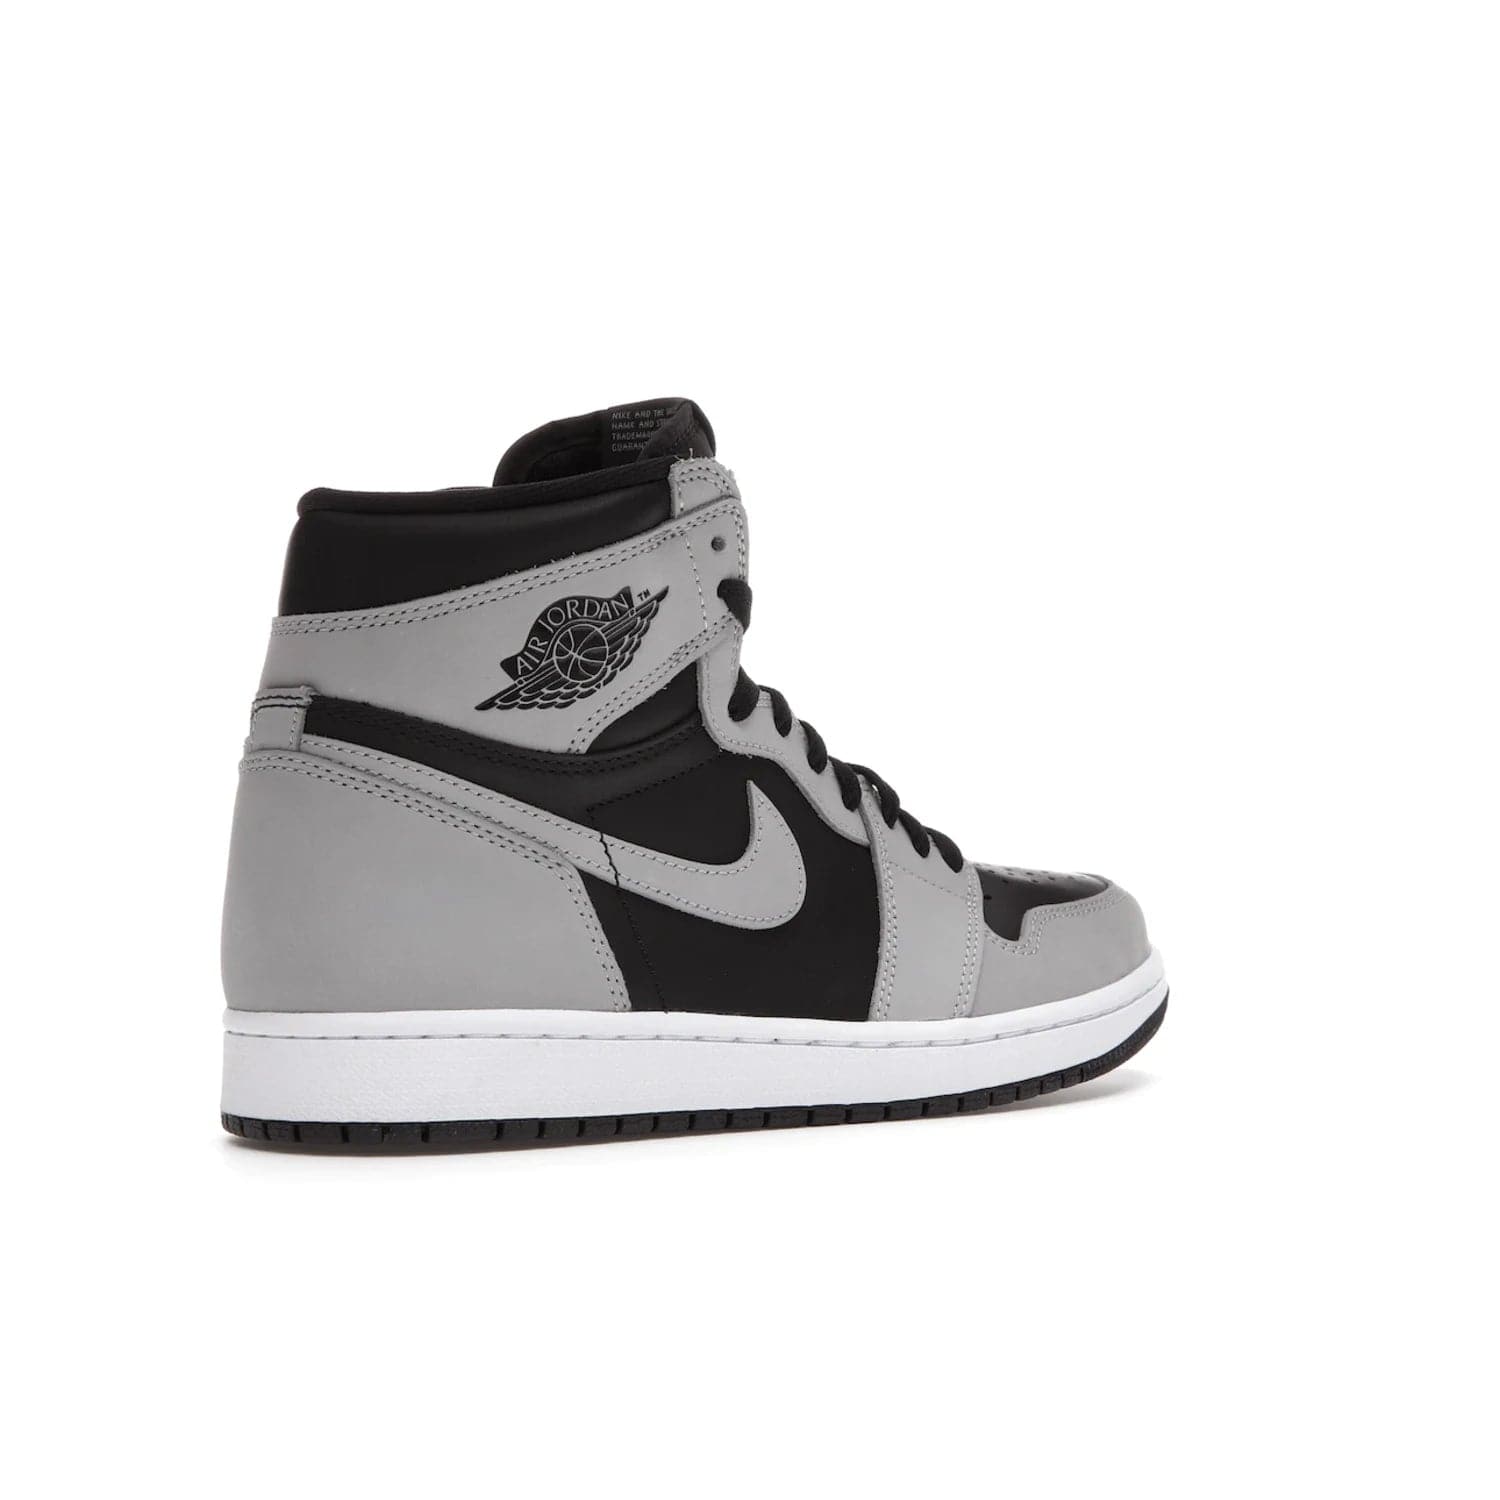 Jordan 1 Retro High Shadow 2.0 - Image 33 - Only at www.BallersClubKickz.com - #
Classic Air Jordan 1 Retro High Shadow 2.0 with black leather base and Light Smoke Grey overlays. Released in May 2021.